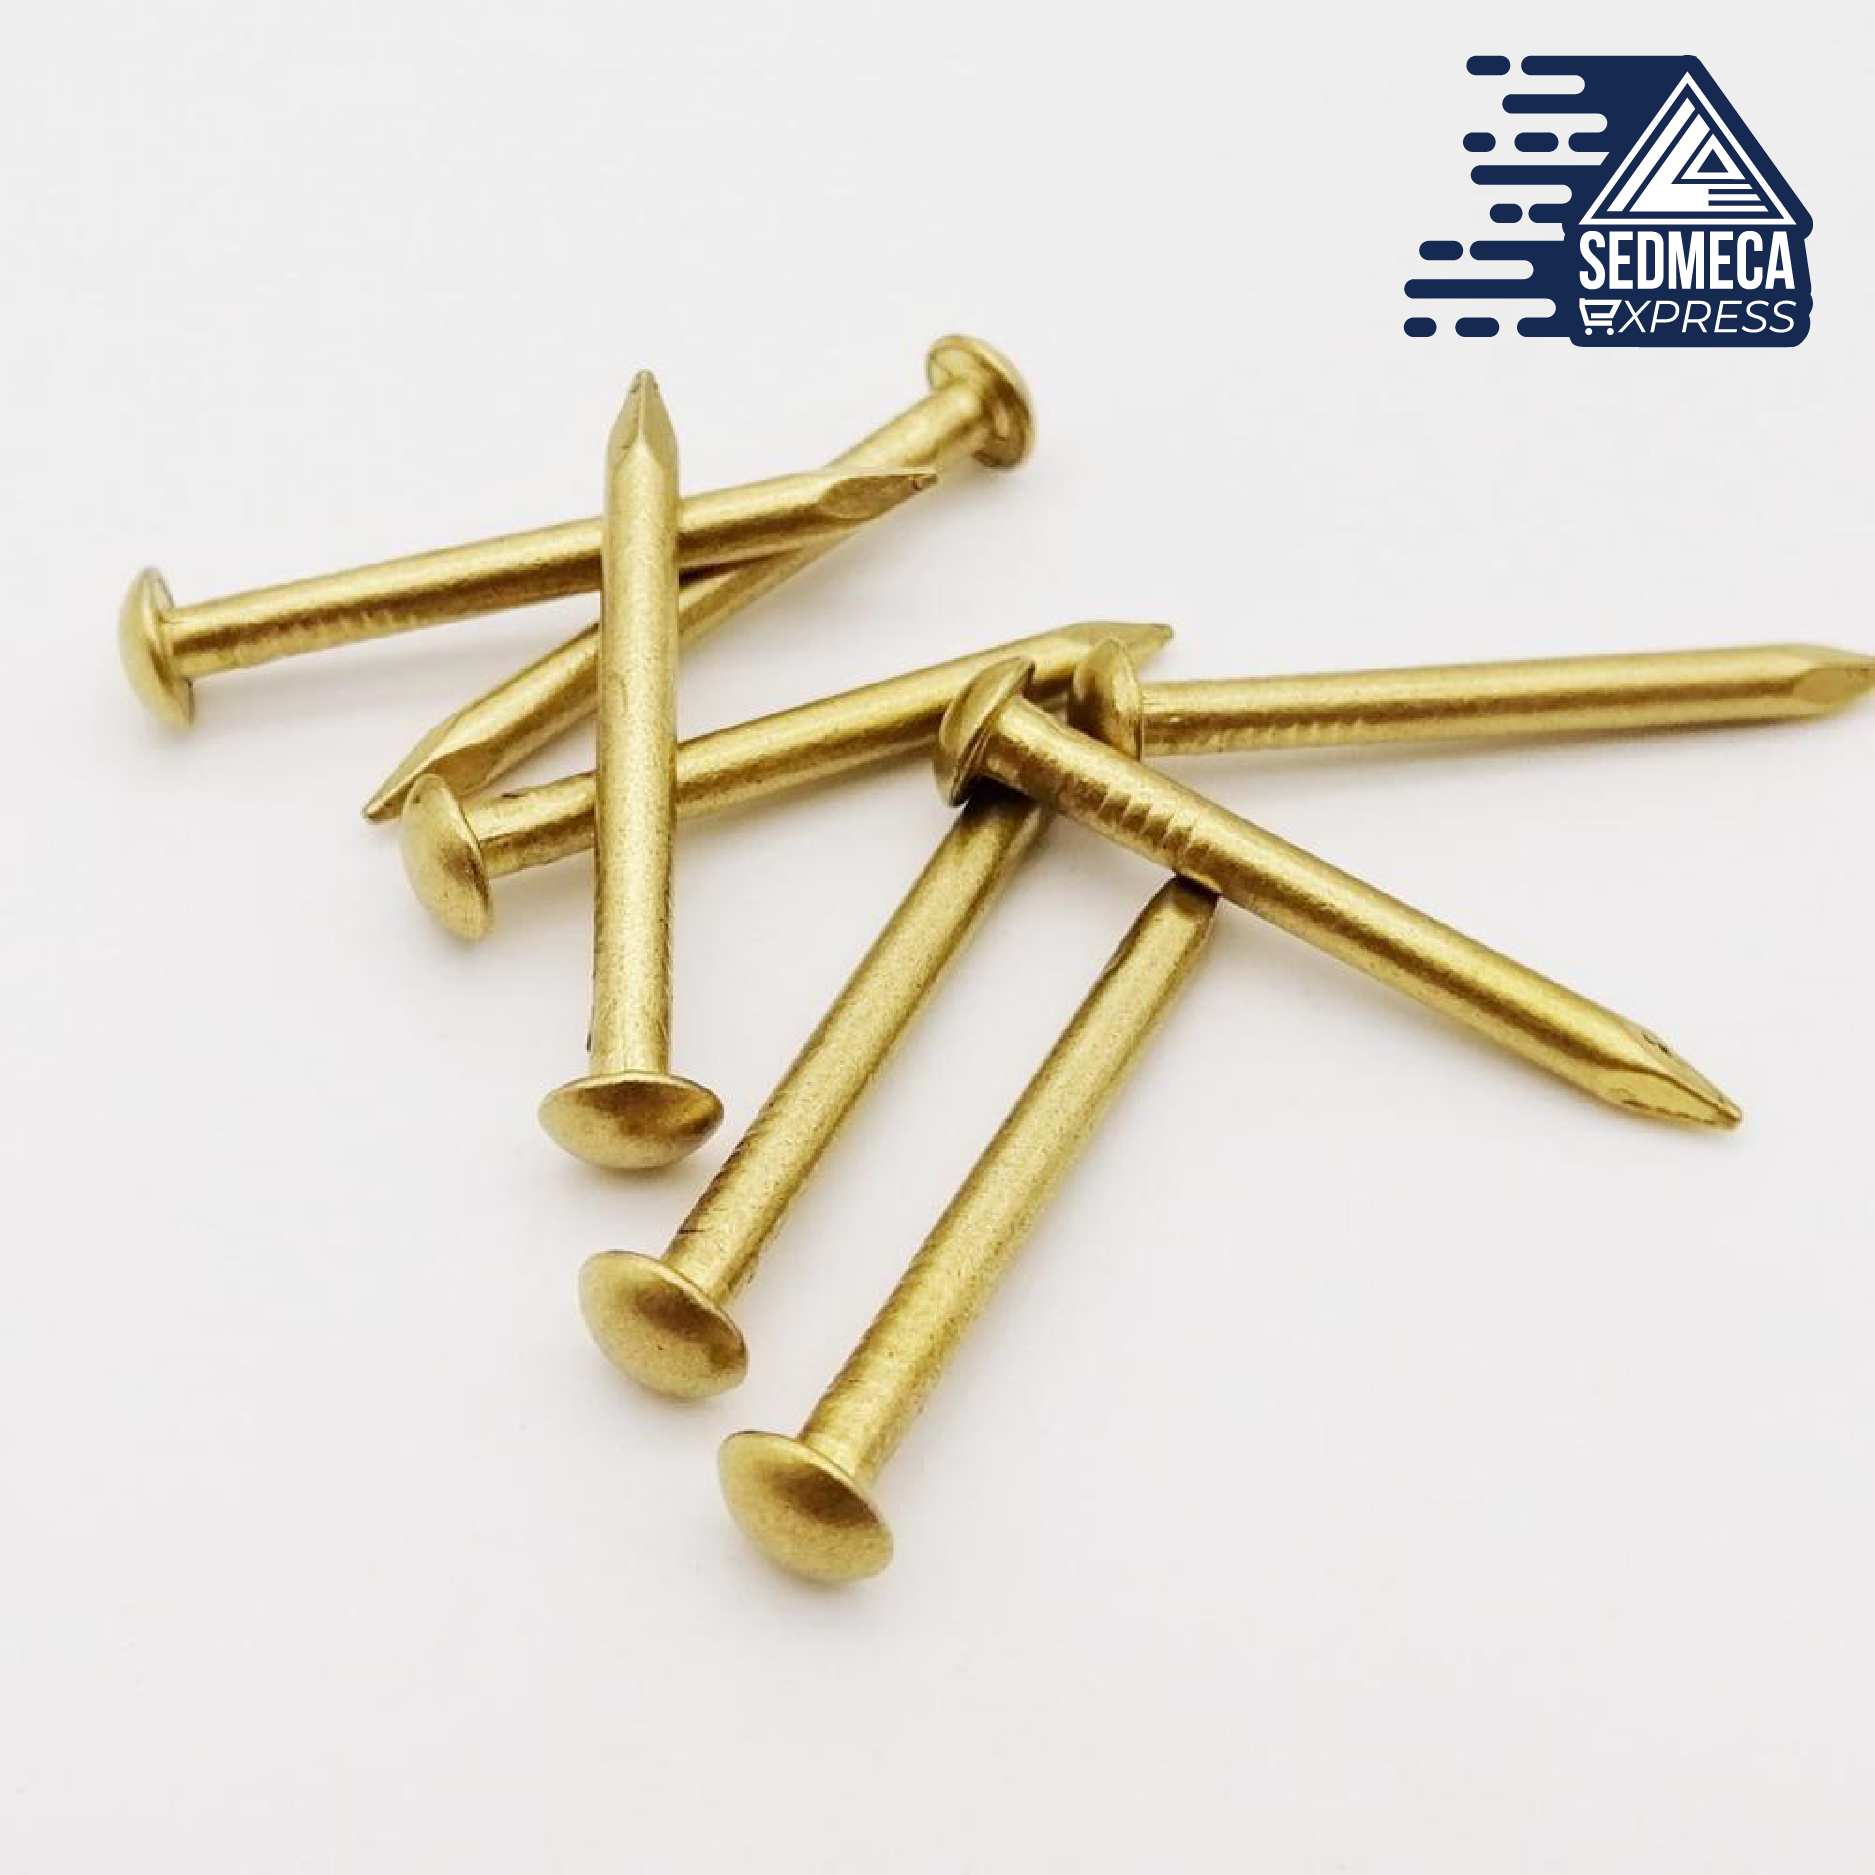 Antique Brass Bronze Small Round Head Nail for Furniture Hinge – SEDMECA  Express